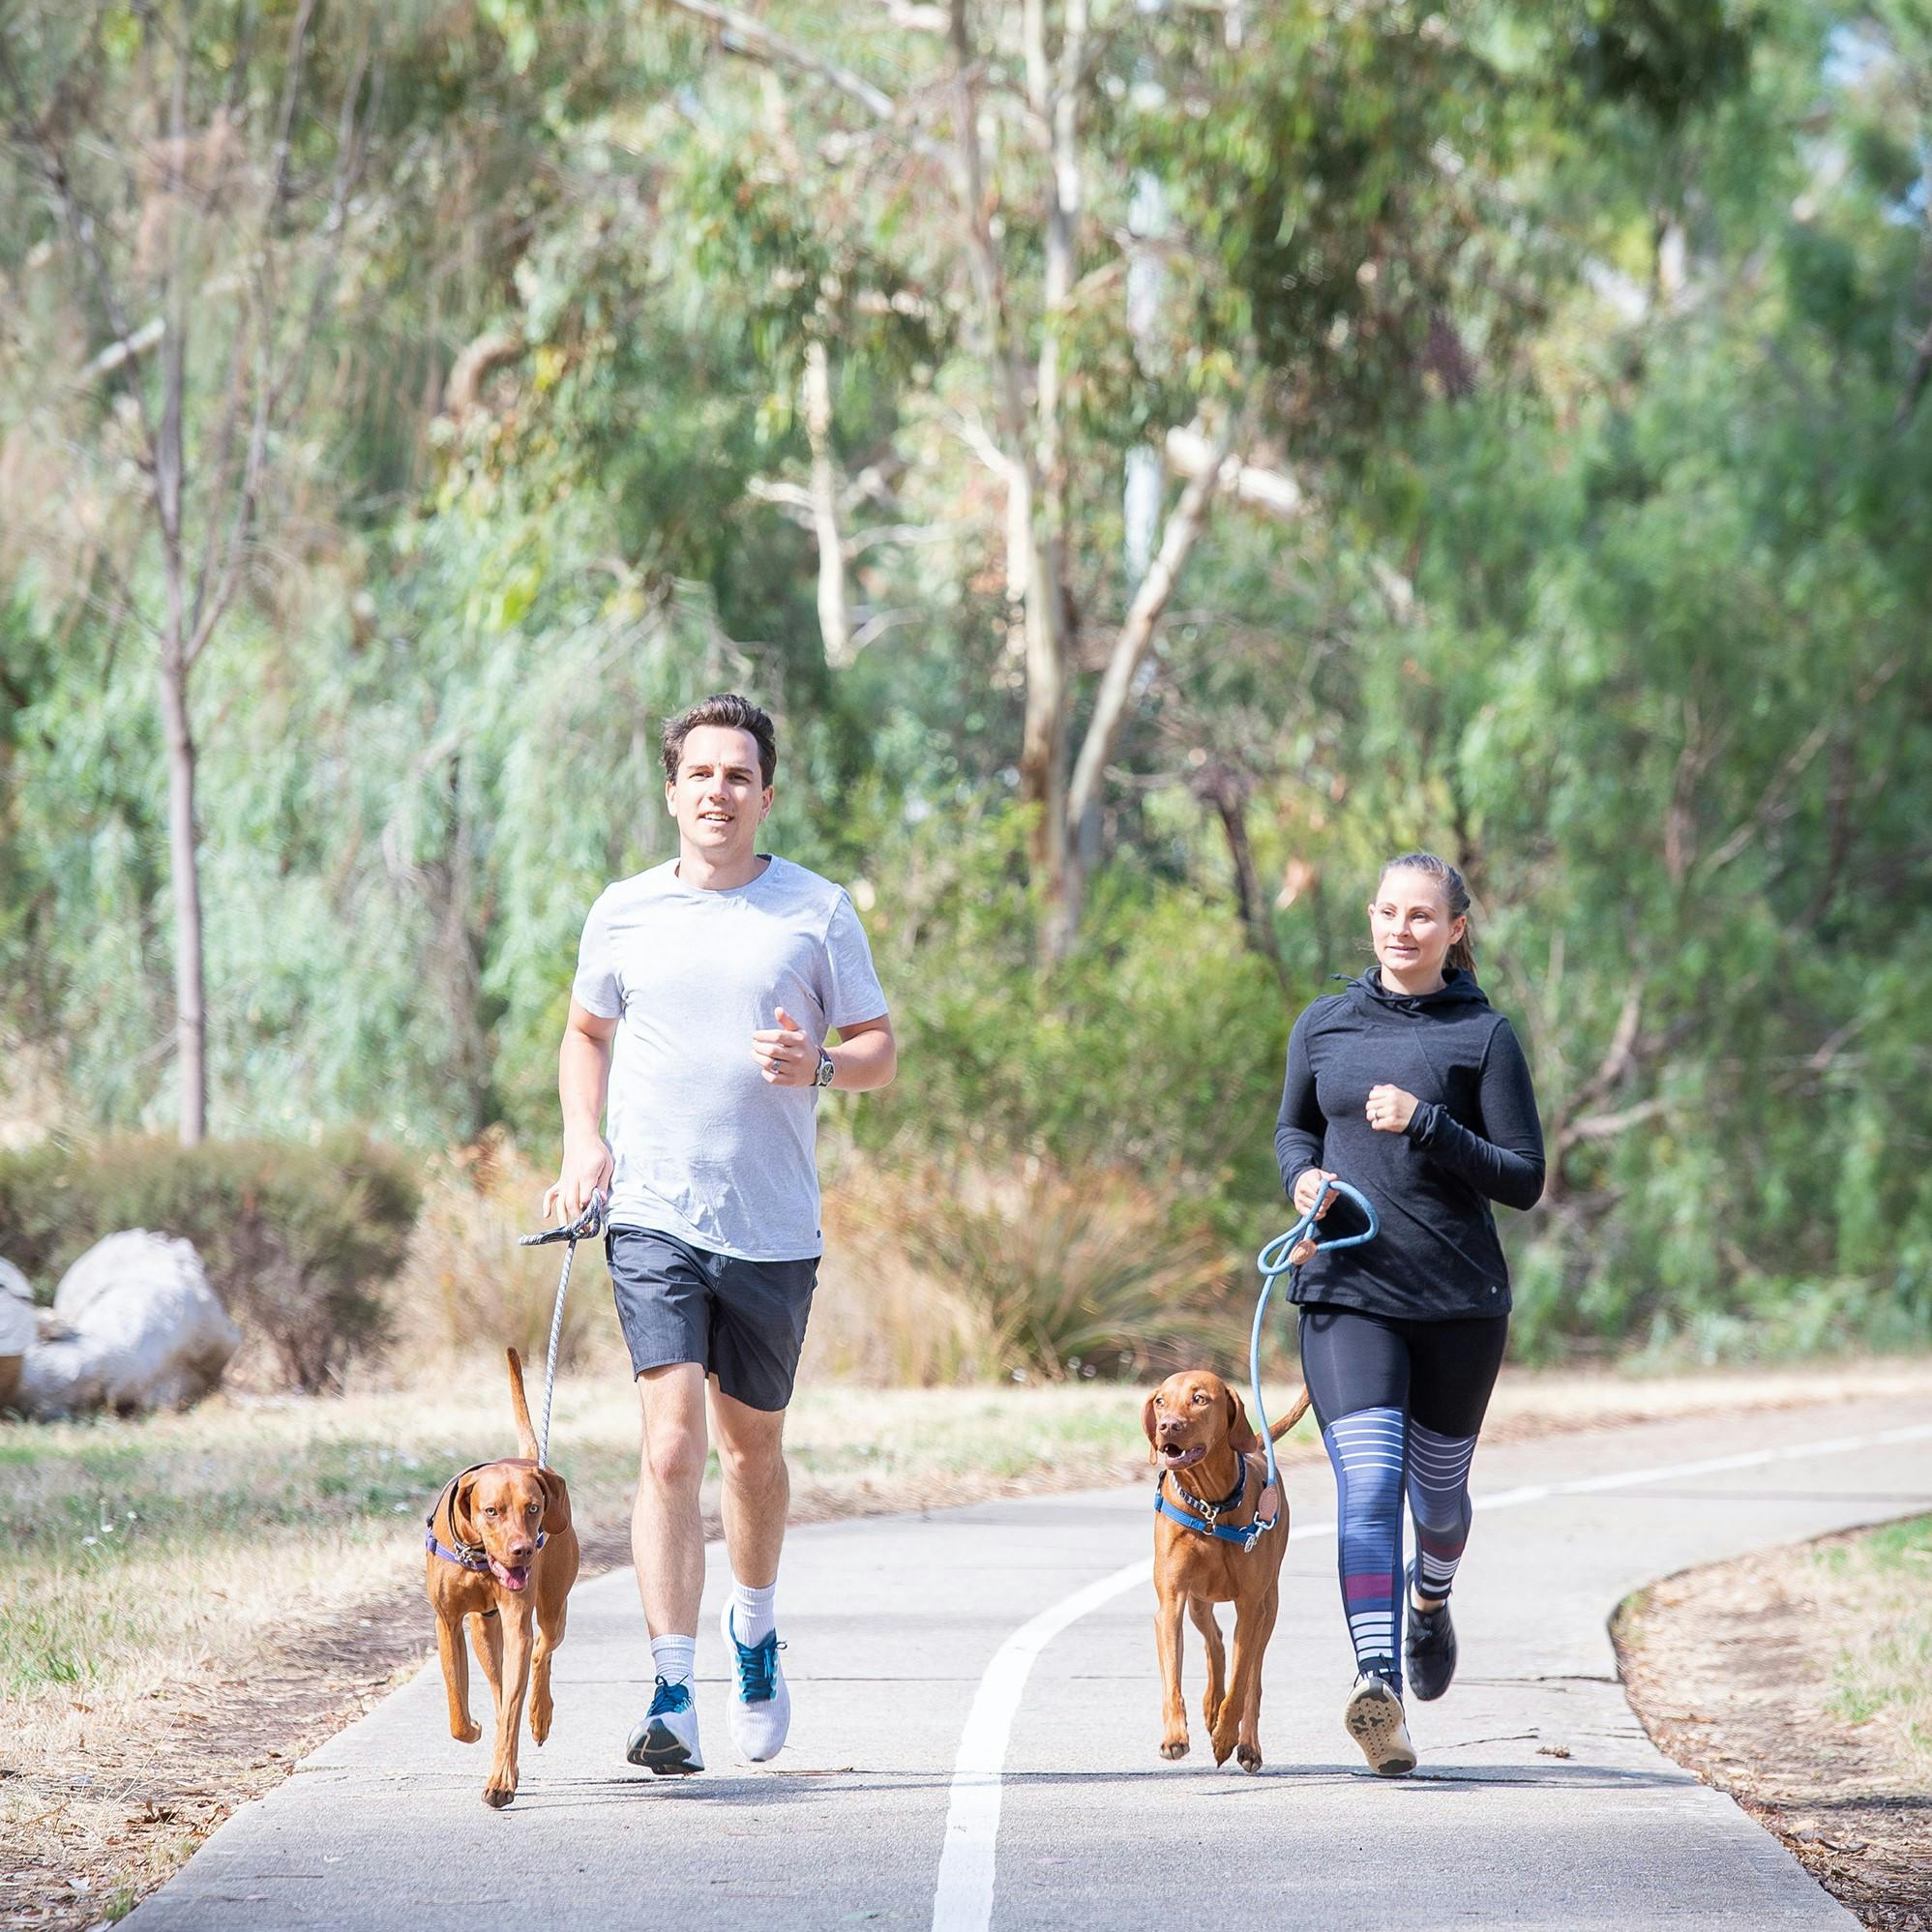 Man and women jogging with their dogs along Dry Creek shared pathway